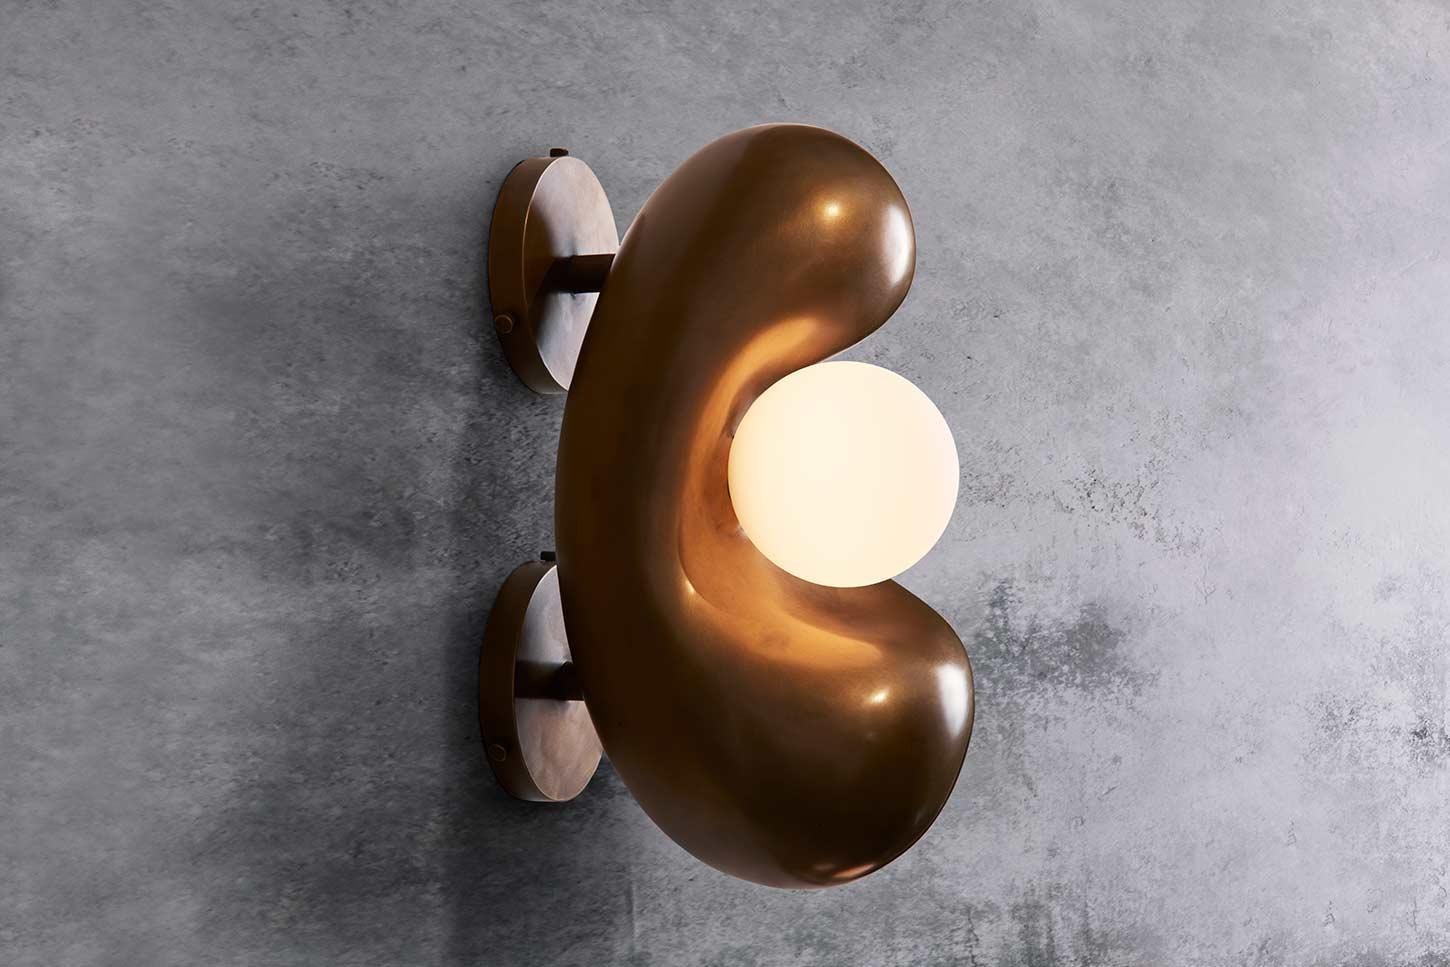 An organic clay sculpture that has been cast in hot-patinated bronze. The addition of hand-blown glass completes this sculptural light form. 